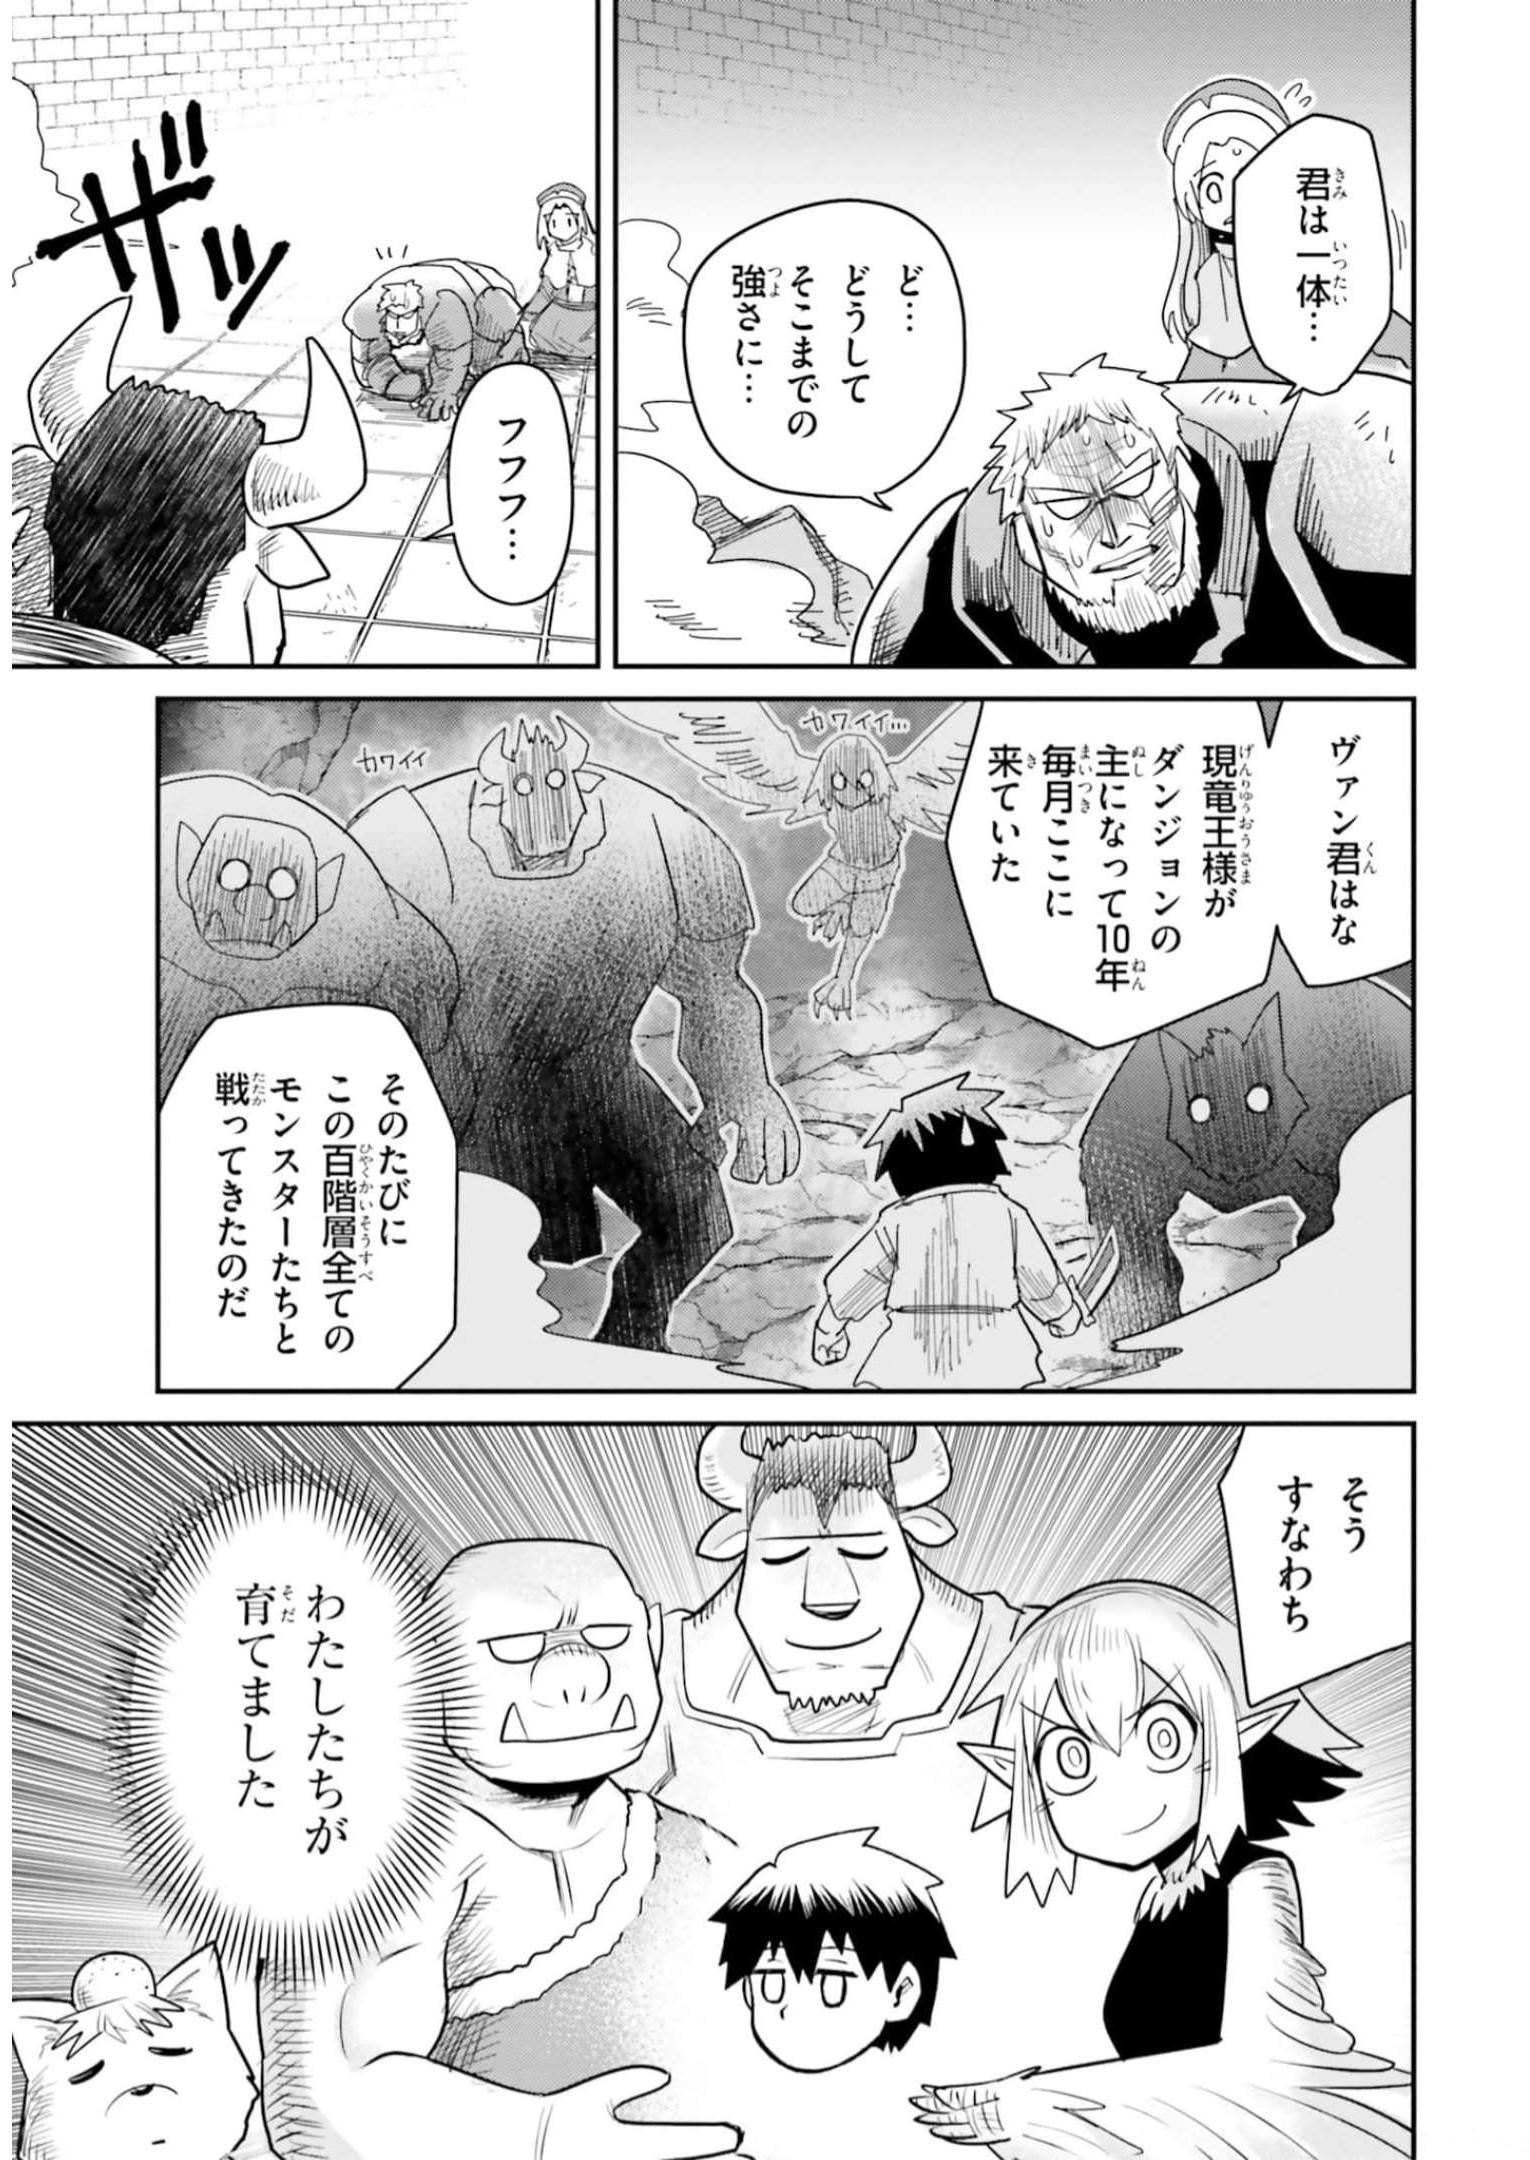 Dungeon Friends Forever Dungeon's Childhood Friend ダンジョンの幼なじみ 第9話 - Page 17